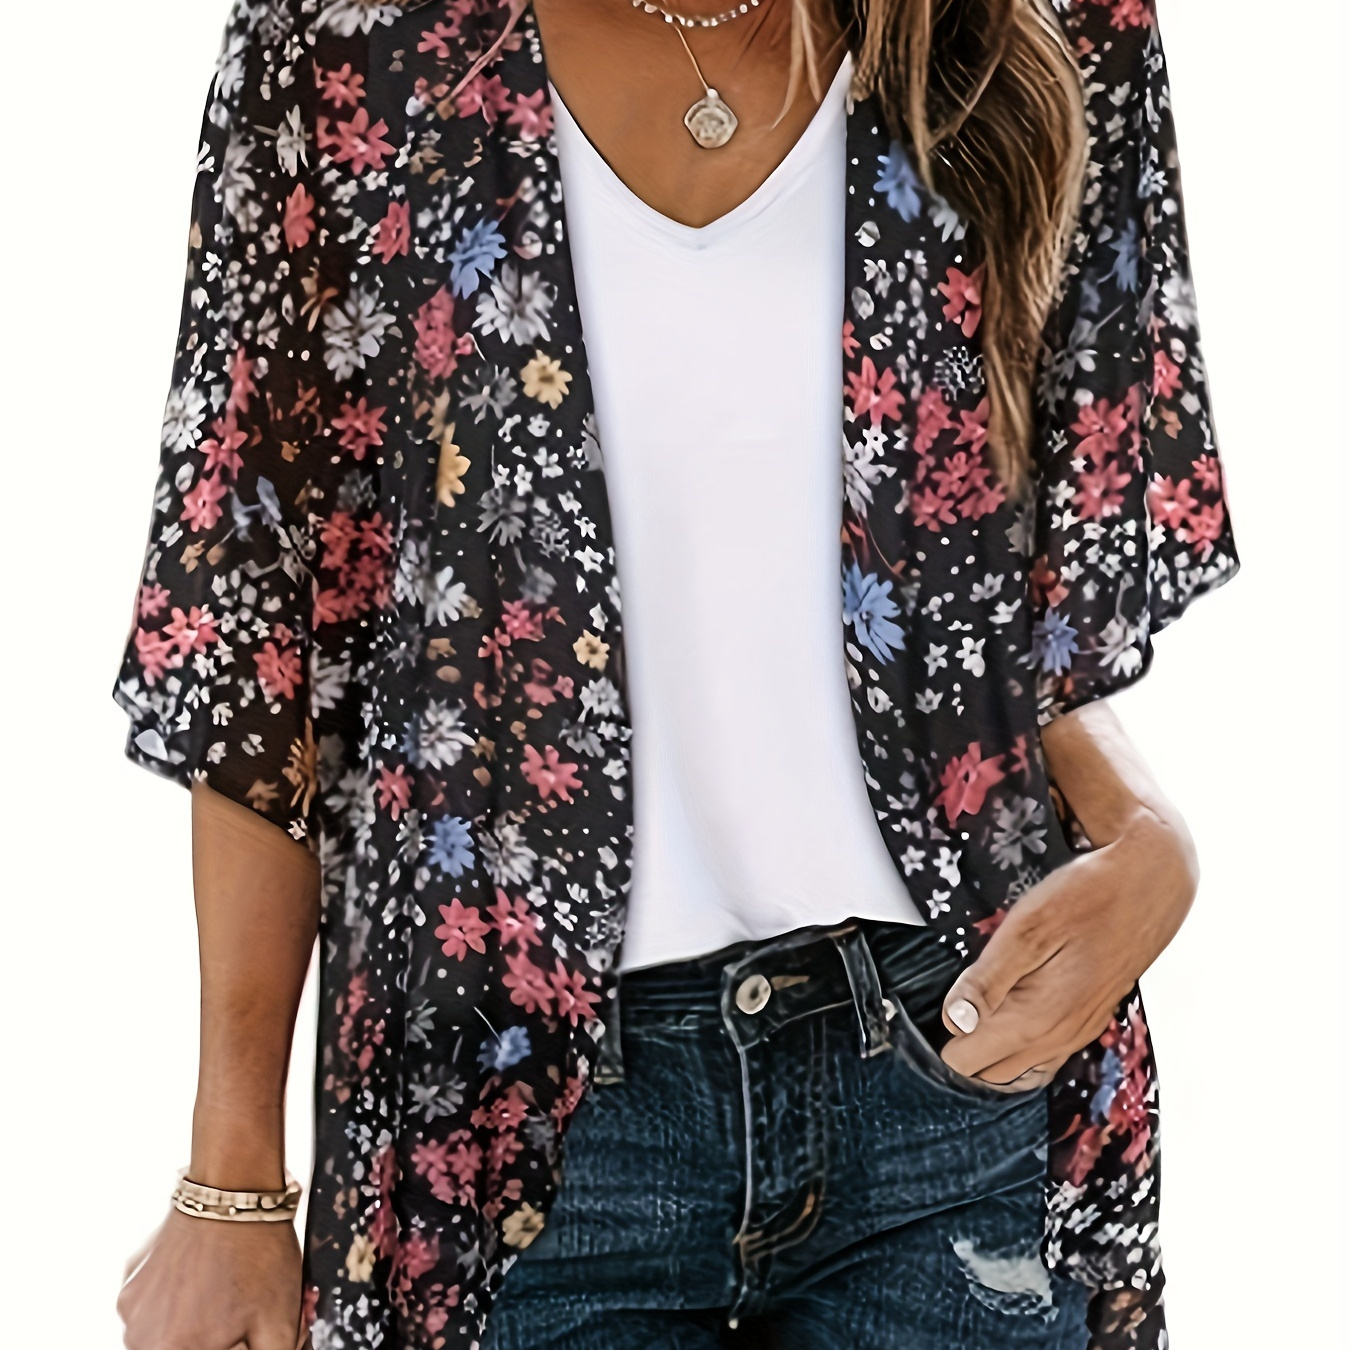 

Women's Floral Print Kimono Cardigan, Elegant Fashion Open Front Loose Cover-up Casual Shirt Top, Versatile Style For Beachwear & Everyday Use